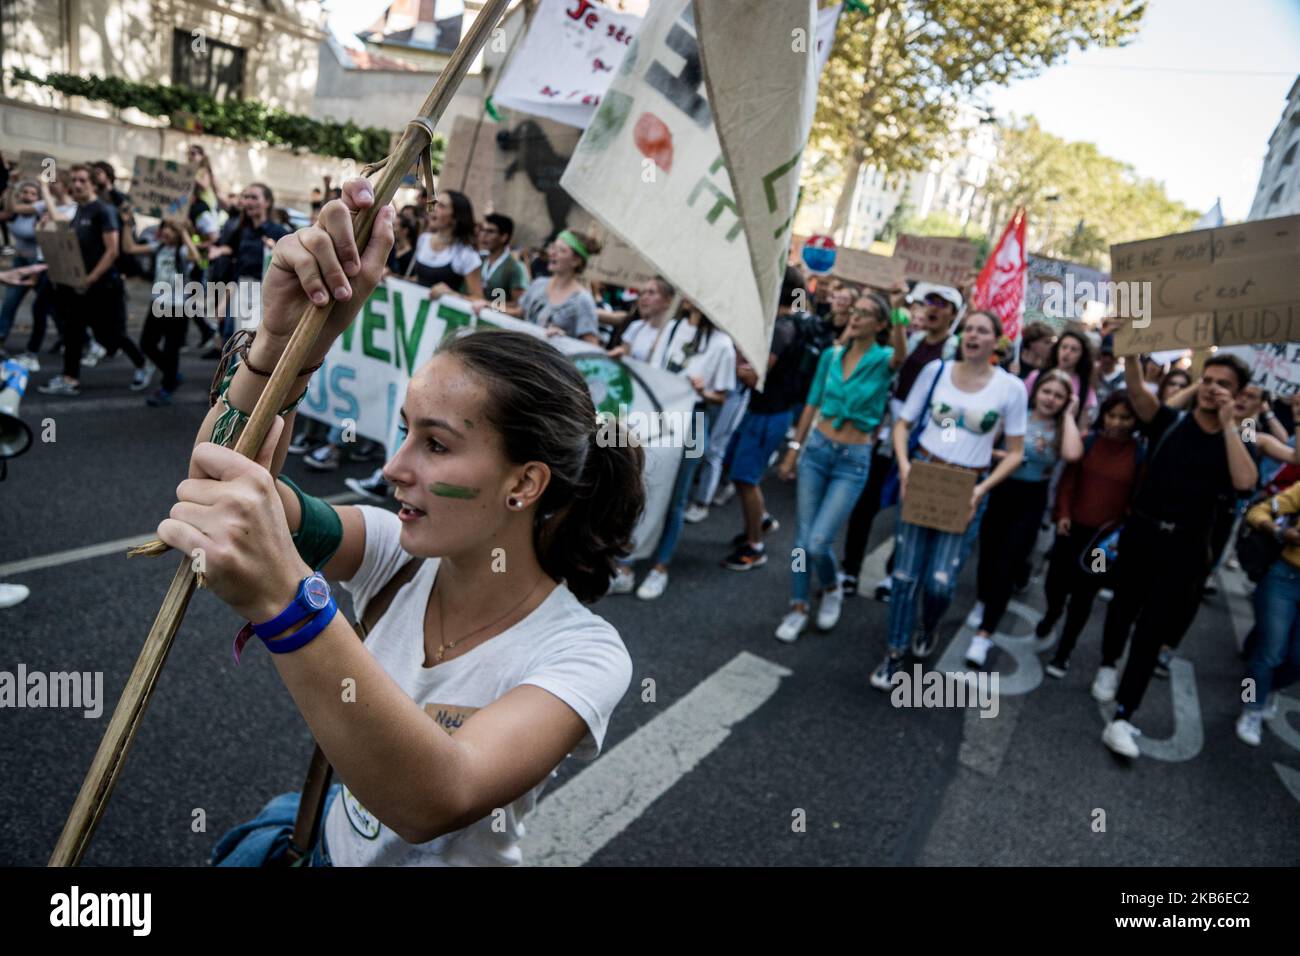 Nearly two thousand people demonstrated to defend the climate in Lyon, France, on 20 September 2019, on the occasion of an international day of mobilization at the call of Greta Thunberg and the Youth For Climate movement. (Photo by Nicolas Liponne/NurPhoto) Stock Photo